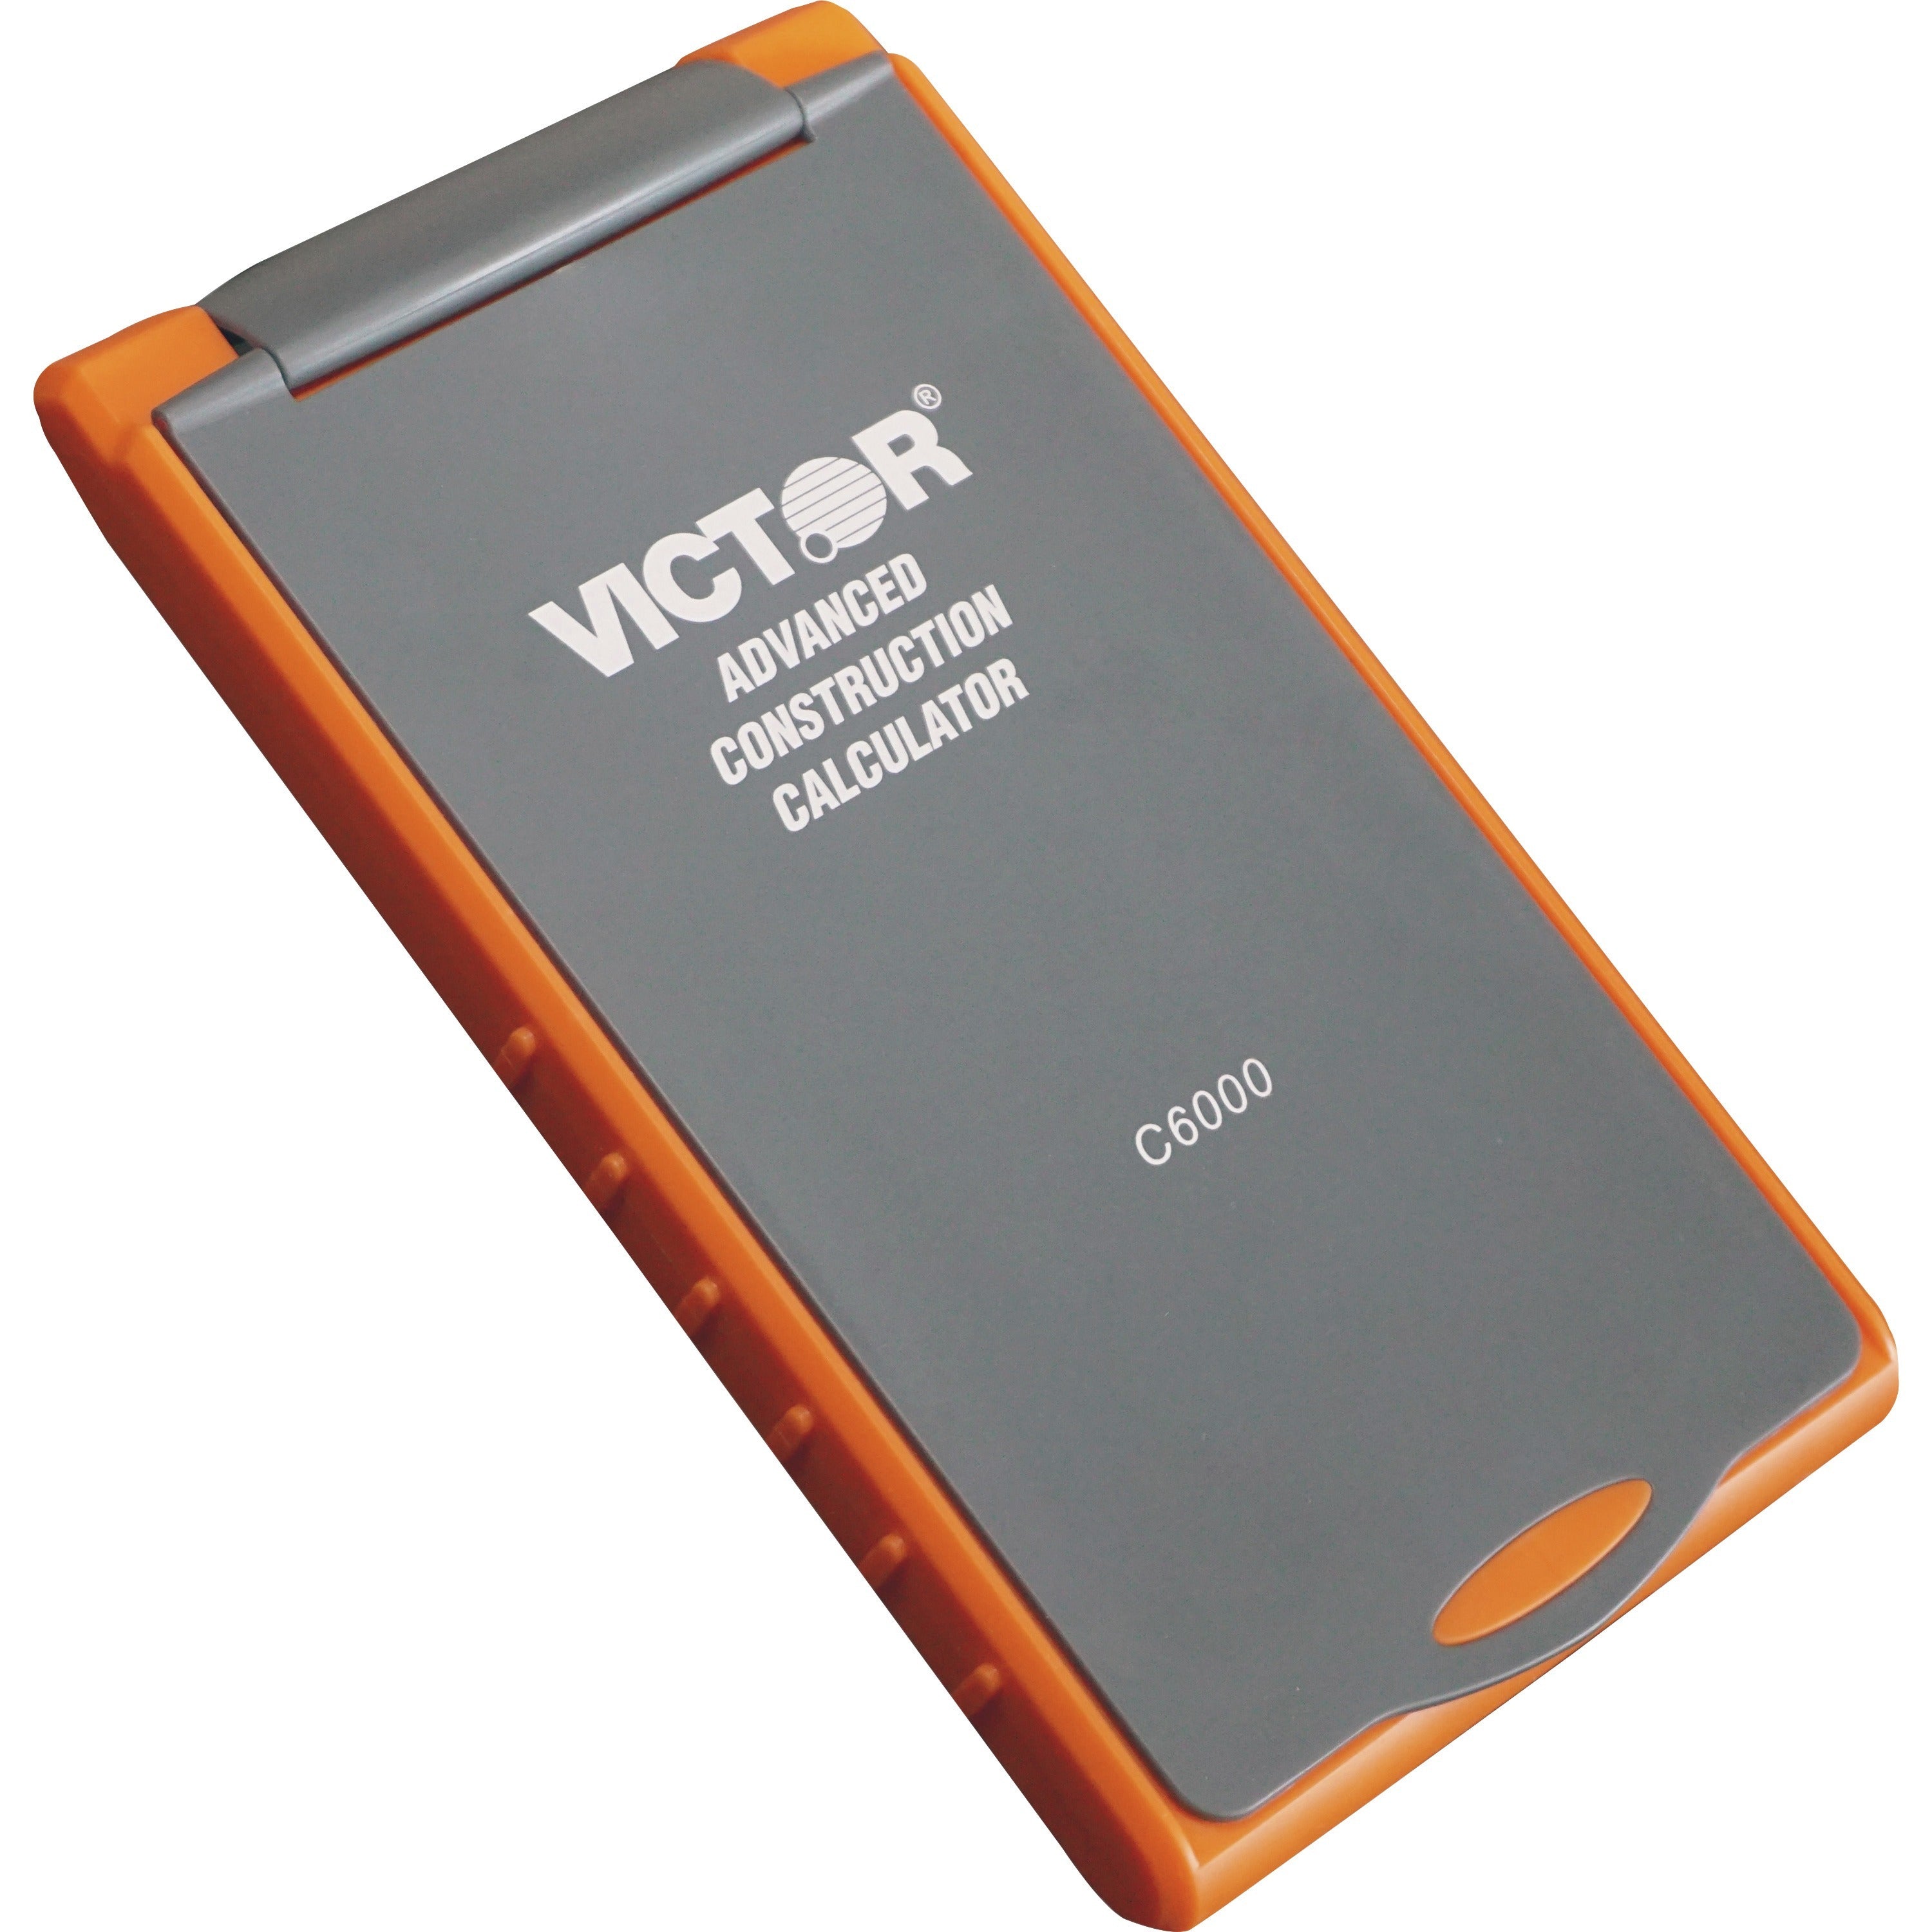 victor-c6000-advanced-construction-calculator-lcd-display-battery-powered-031-lcd-battery-powered-2-lr44-65-x-35-x-08-orange_vctc6000 - 2